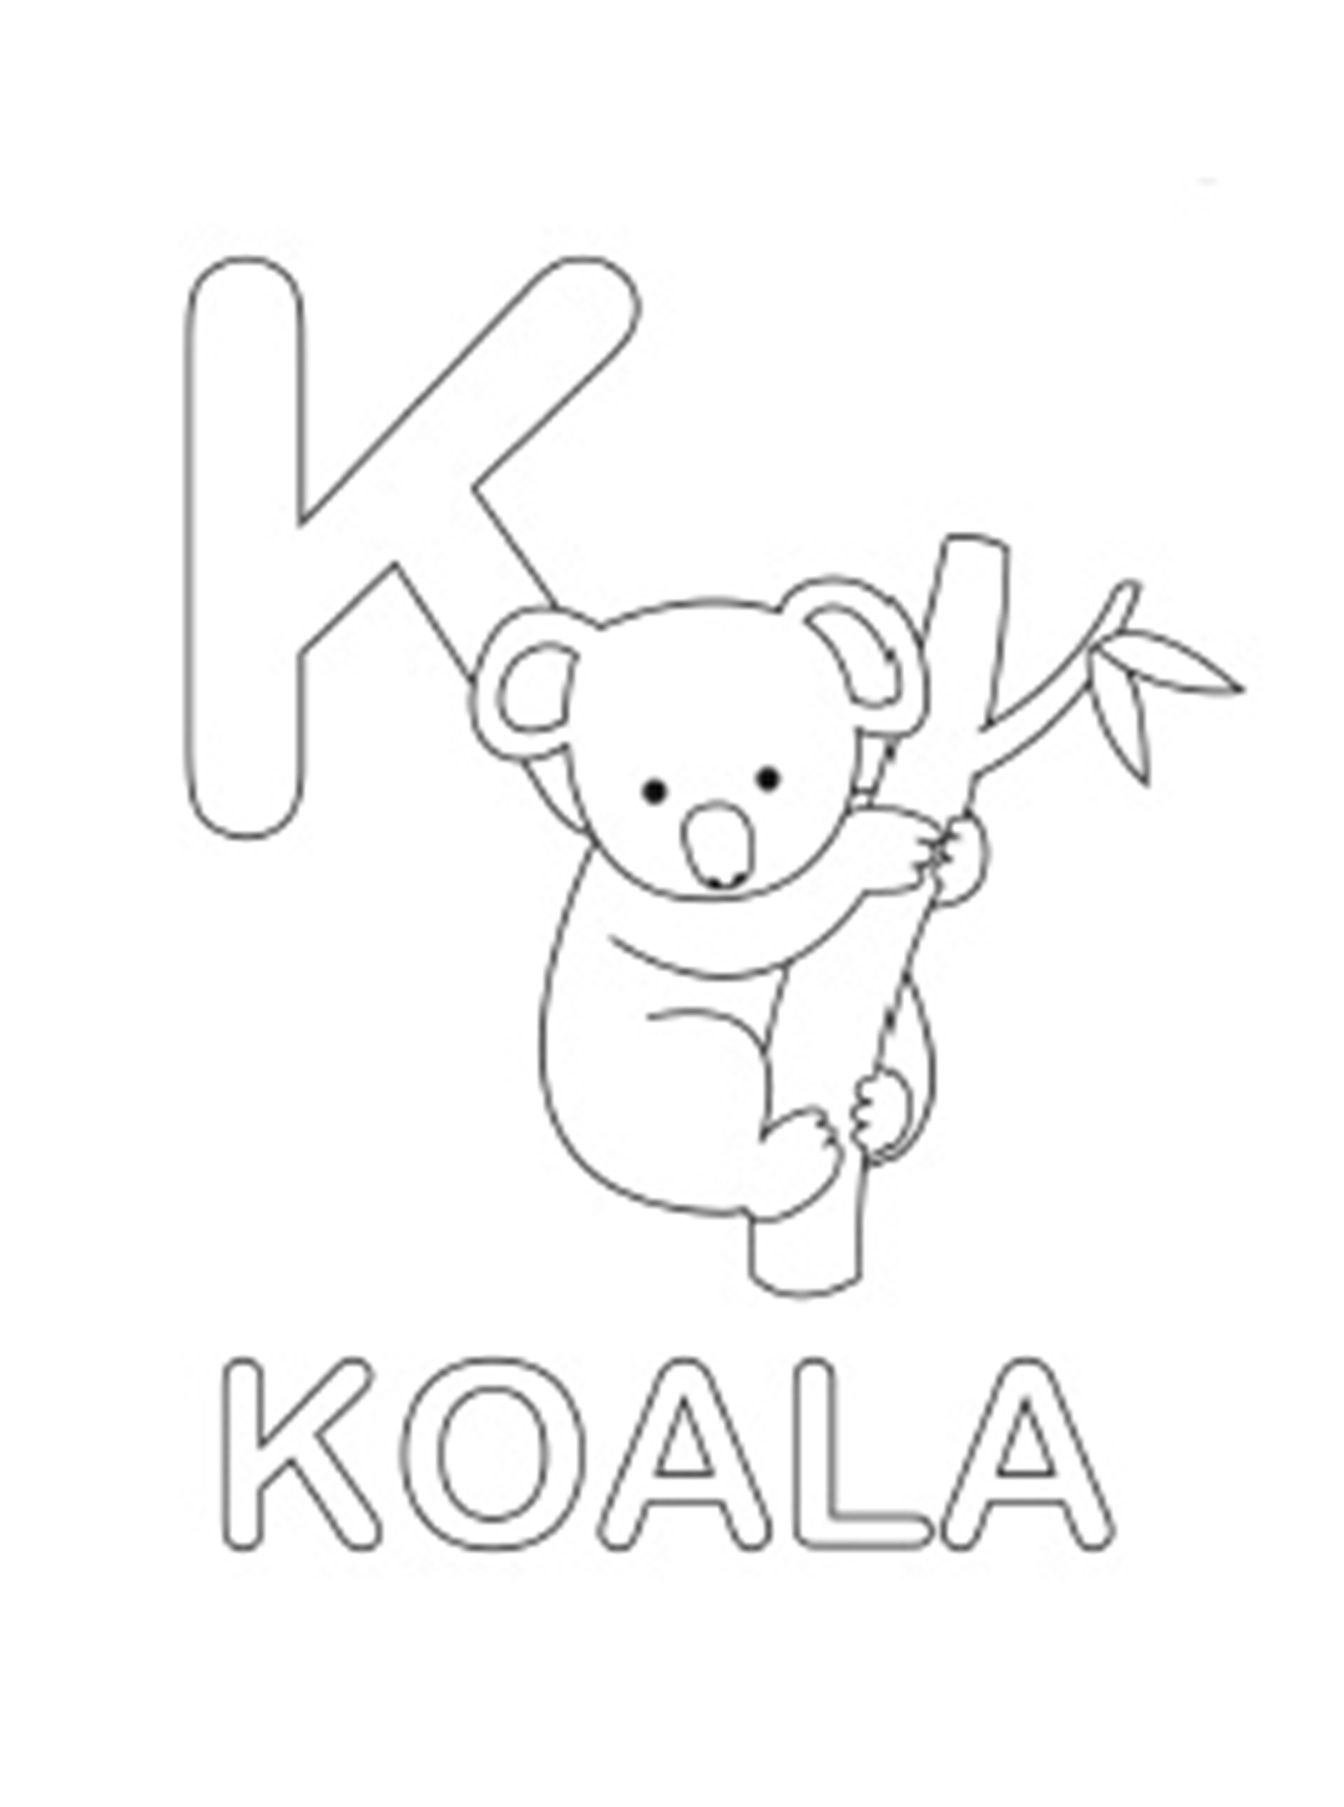 Koalas, Animal coloring pages and Coloring book pages